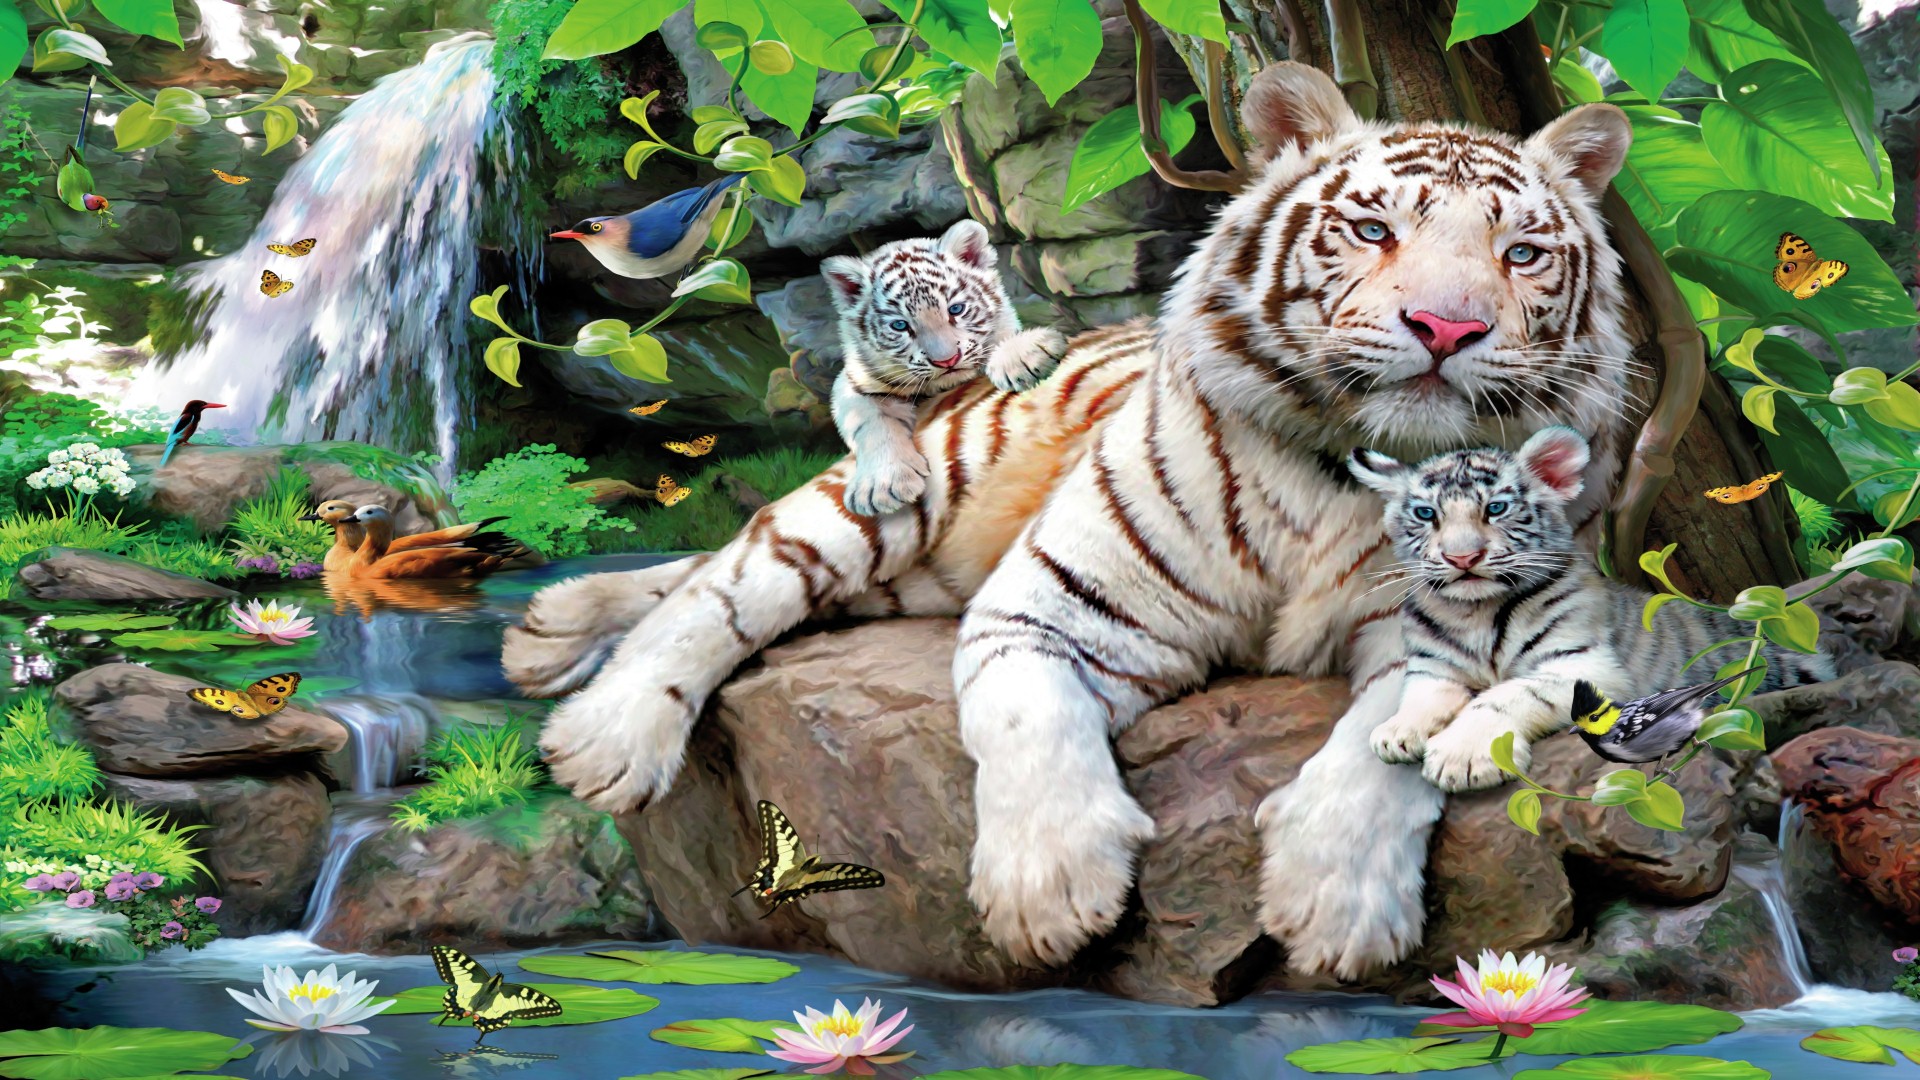 water lily, leaf, pond, animal, white tiger, bird, butterfly, cub, tiger, tree, cats